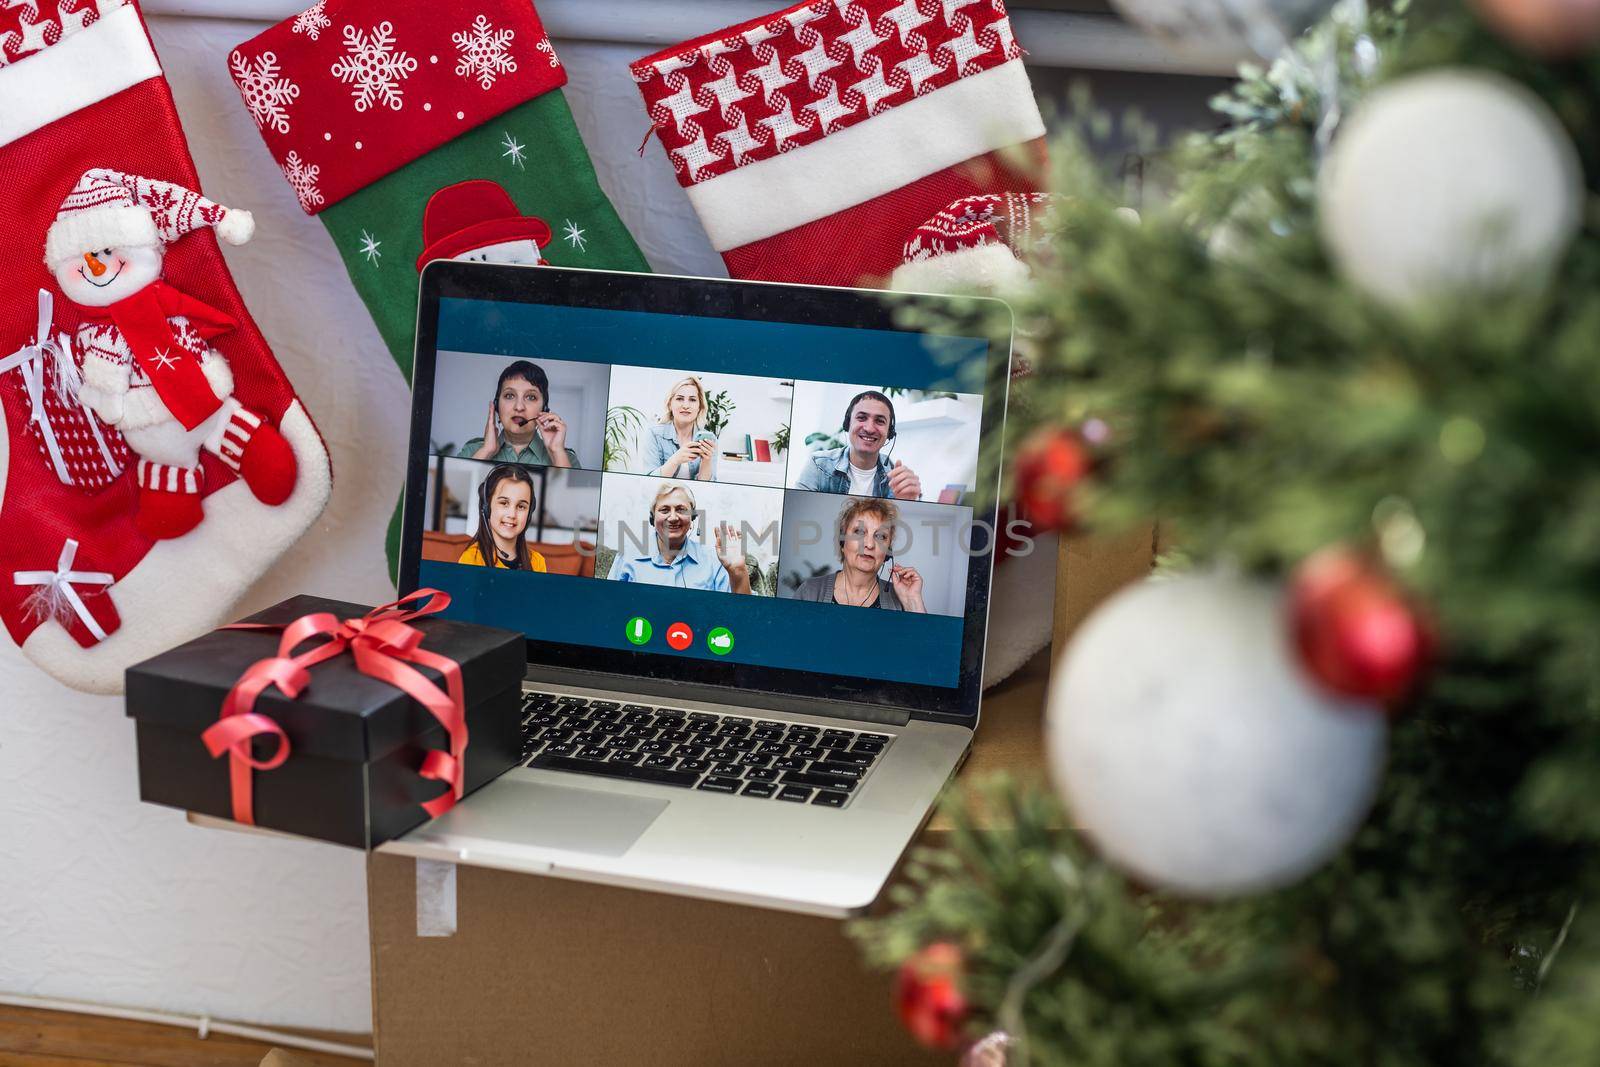 Virtual Christmas day house party. video conferencing, video call via computer in the home office. Online team gift opening conference calling